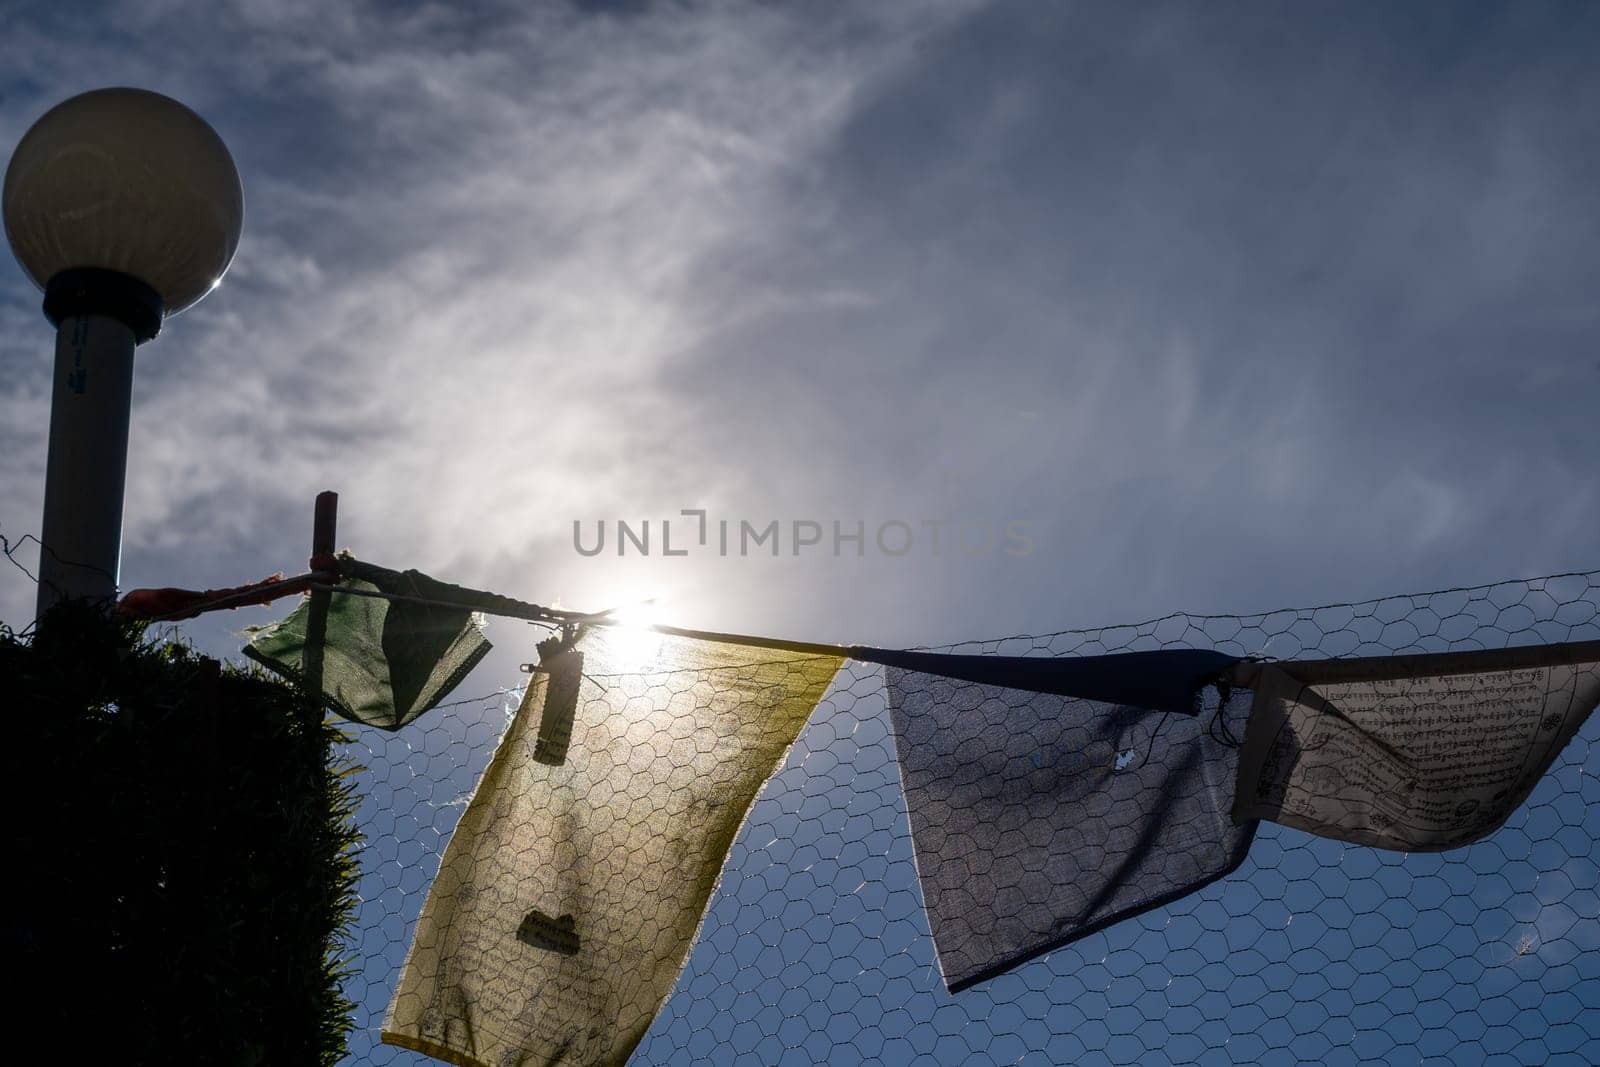 religious multicolored prayer flags old and tattered torn moving in the wind showing a bhuddist prayer incantation common in hill stations in Himachal Pradesh by Shalinimathur